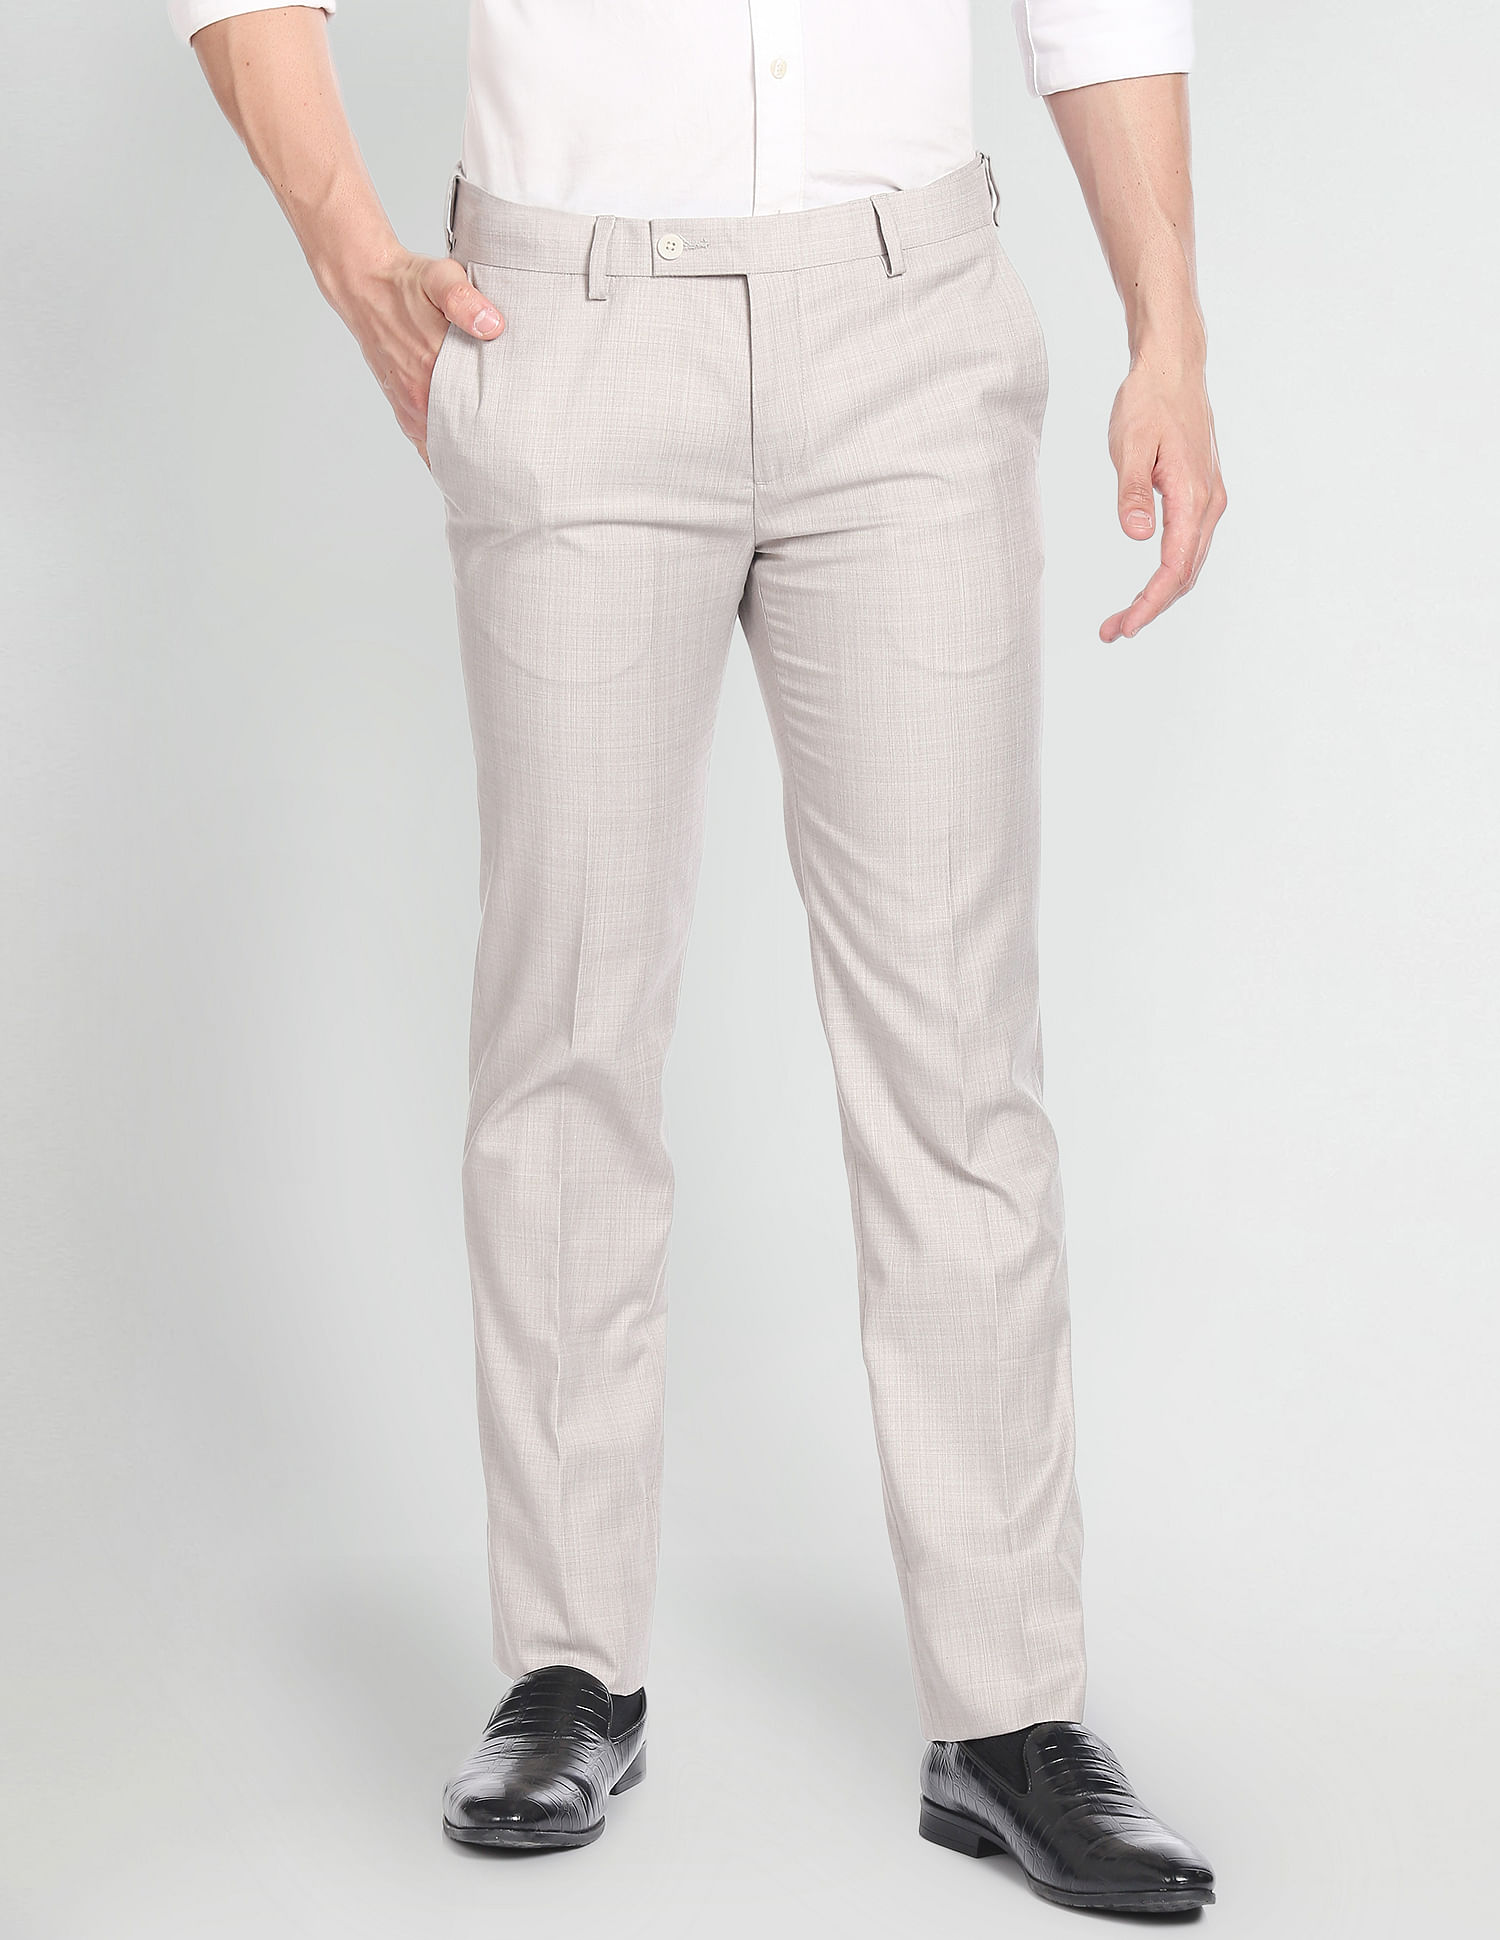 Buy Arrow Dobby Weave Hudson Tailored Fit Formal Trousers - NNNOW.com